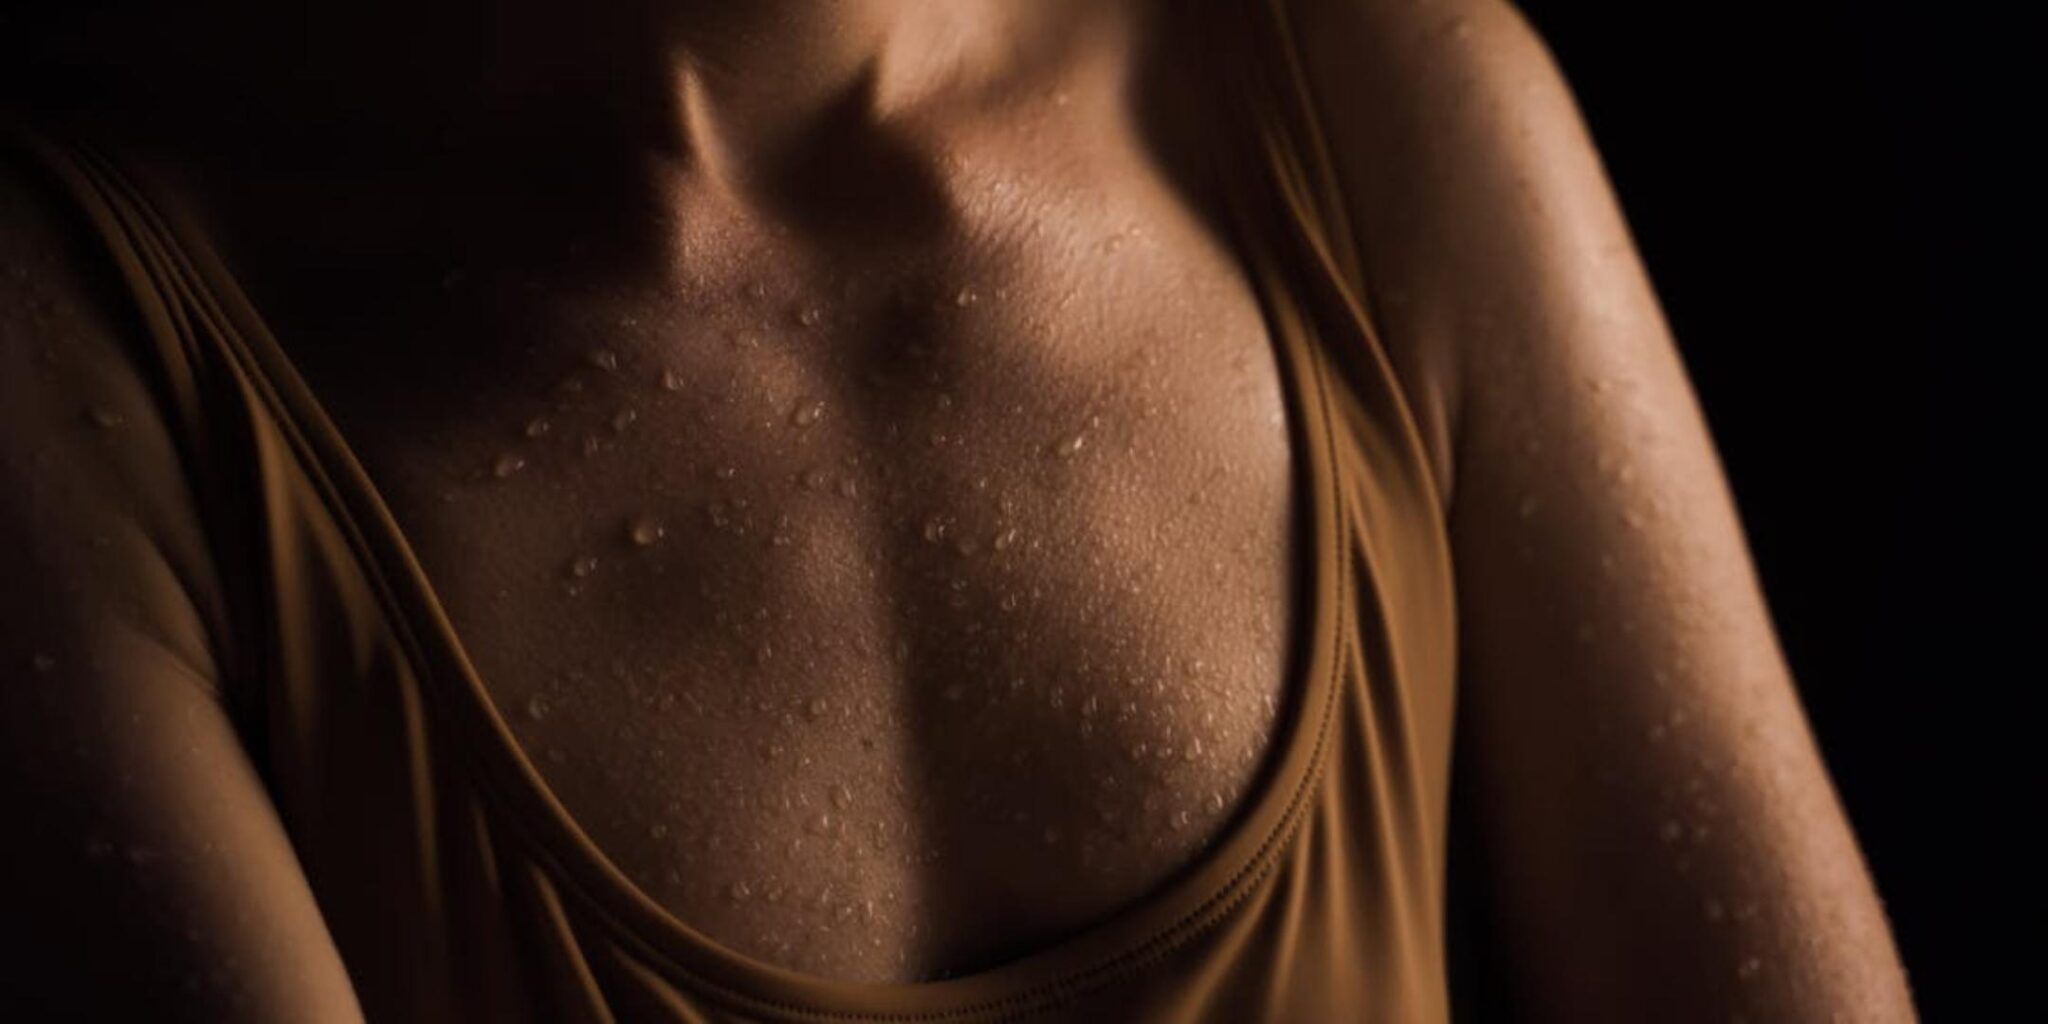 large pores on breasts